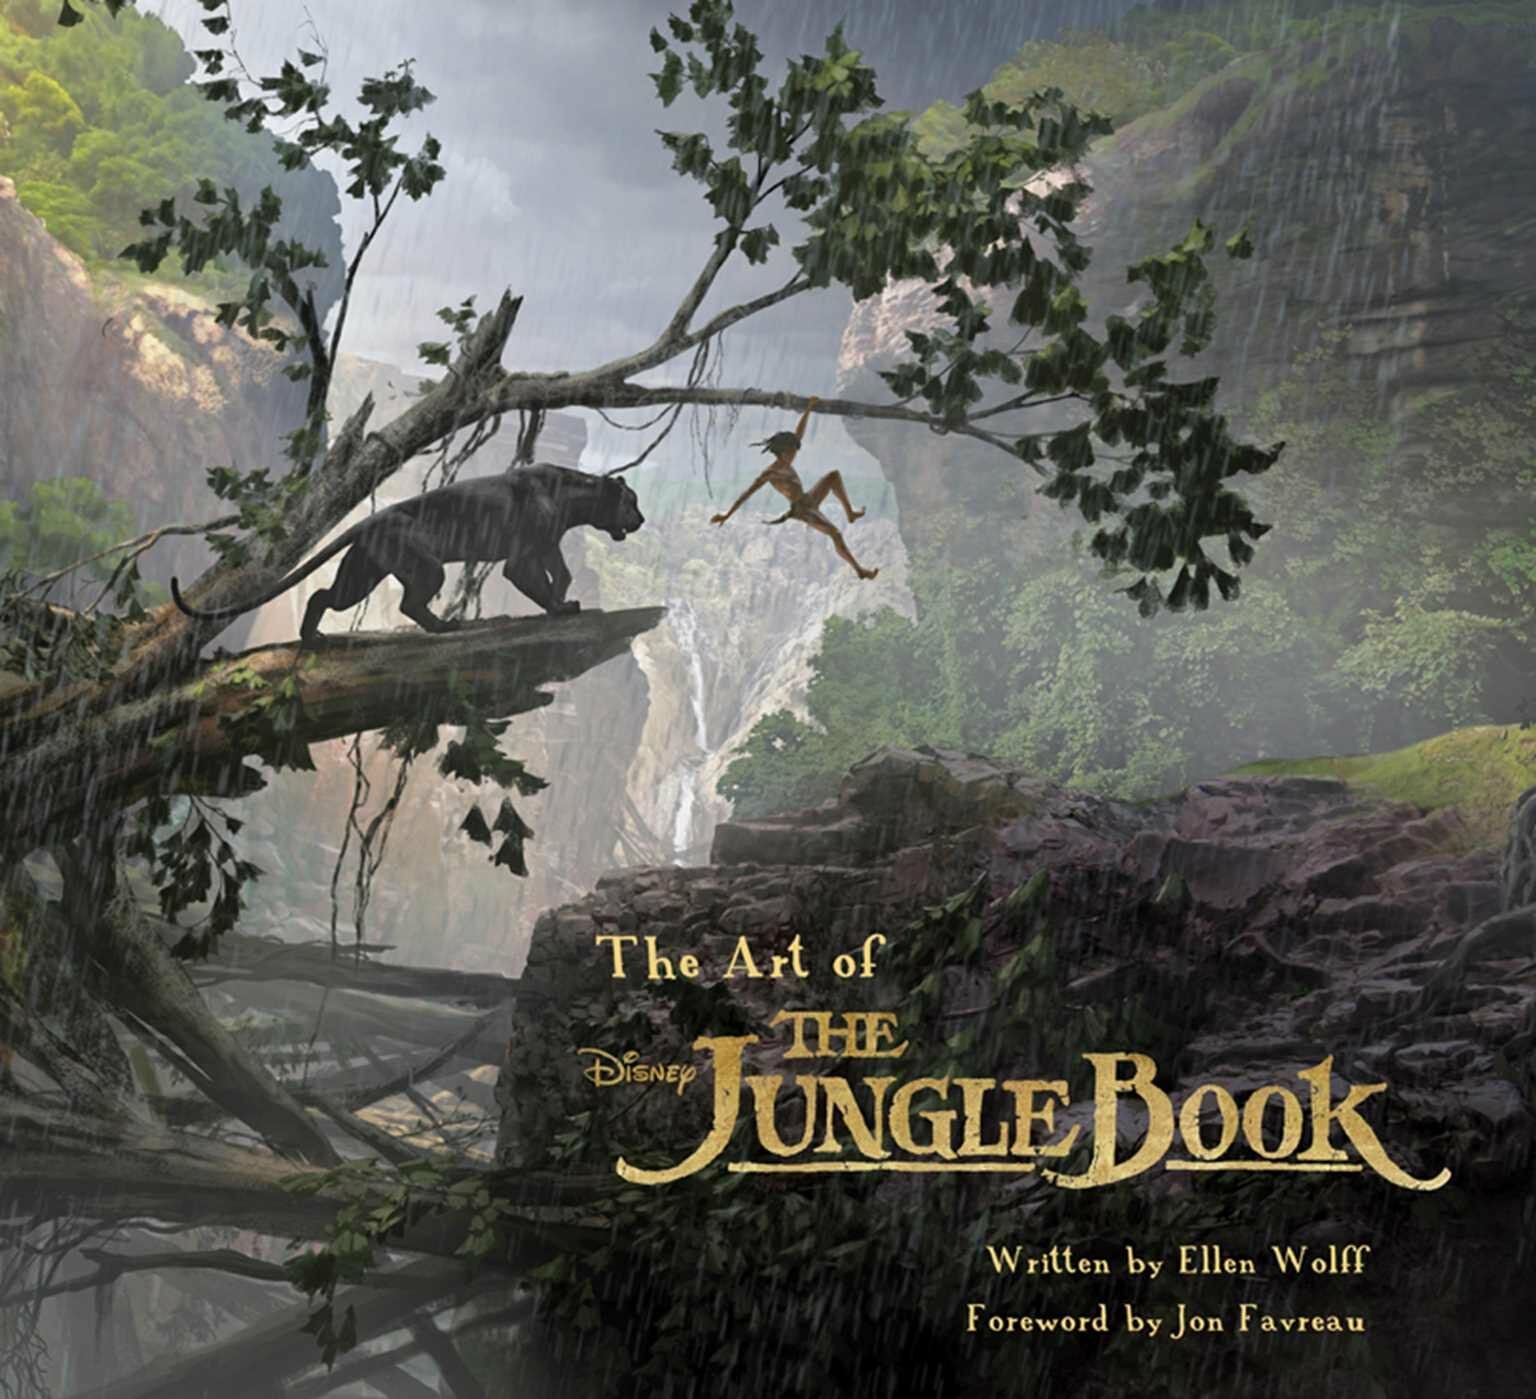 ART OF THE JUNGLE BOOK (Hardcover)